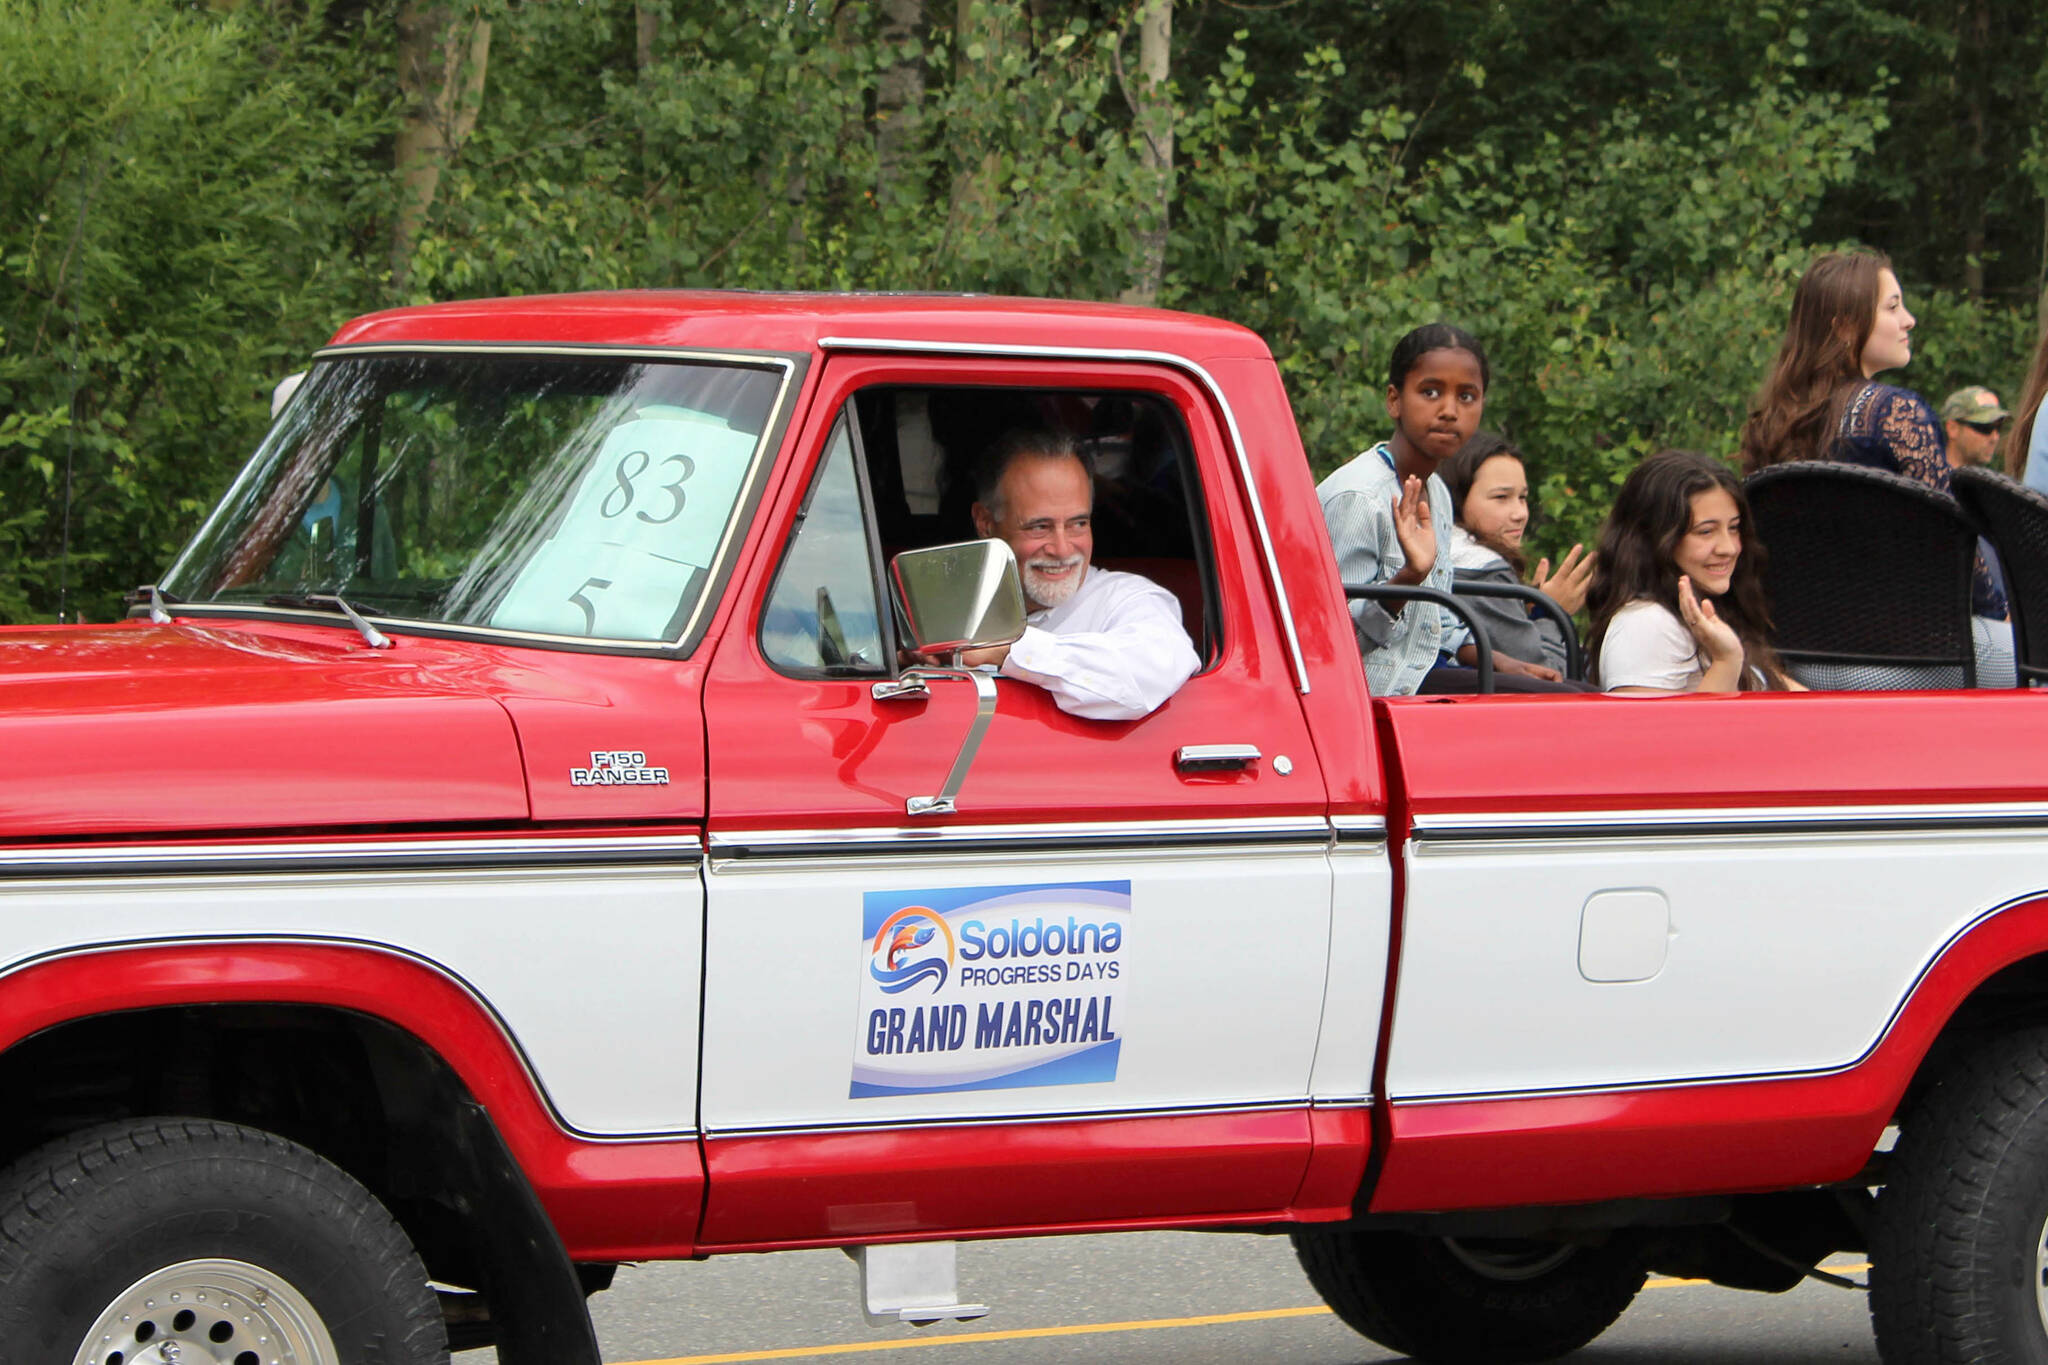 Alaska State Sen. Peter Micciche waves to attendees during the 65th annual Soldotna Progress Days Parade on Saturday, July 23, 2022, in Soldotna, Alaska. Micciche, who currently serves as president of the Alaska Senate, was named this year’s grand marshal. (Ashlyn O’Hara/Peninsula Clarion)